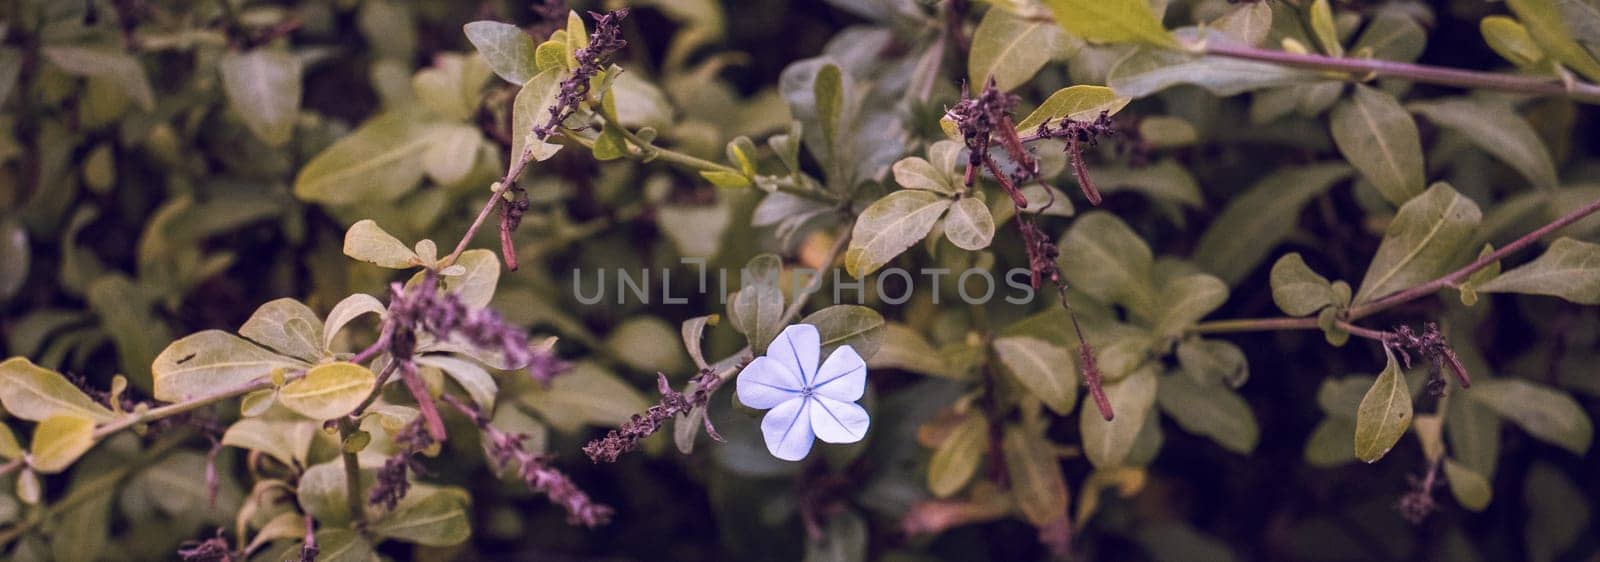 Close up blue meadow wildflowers concept photo. Countryside at autumn season. by _Nataly_Nati_